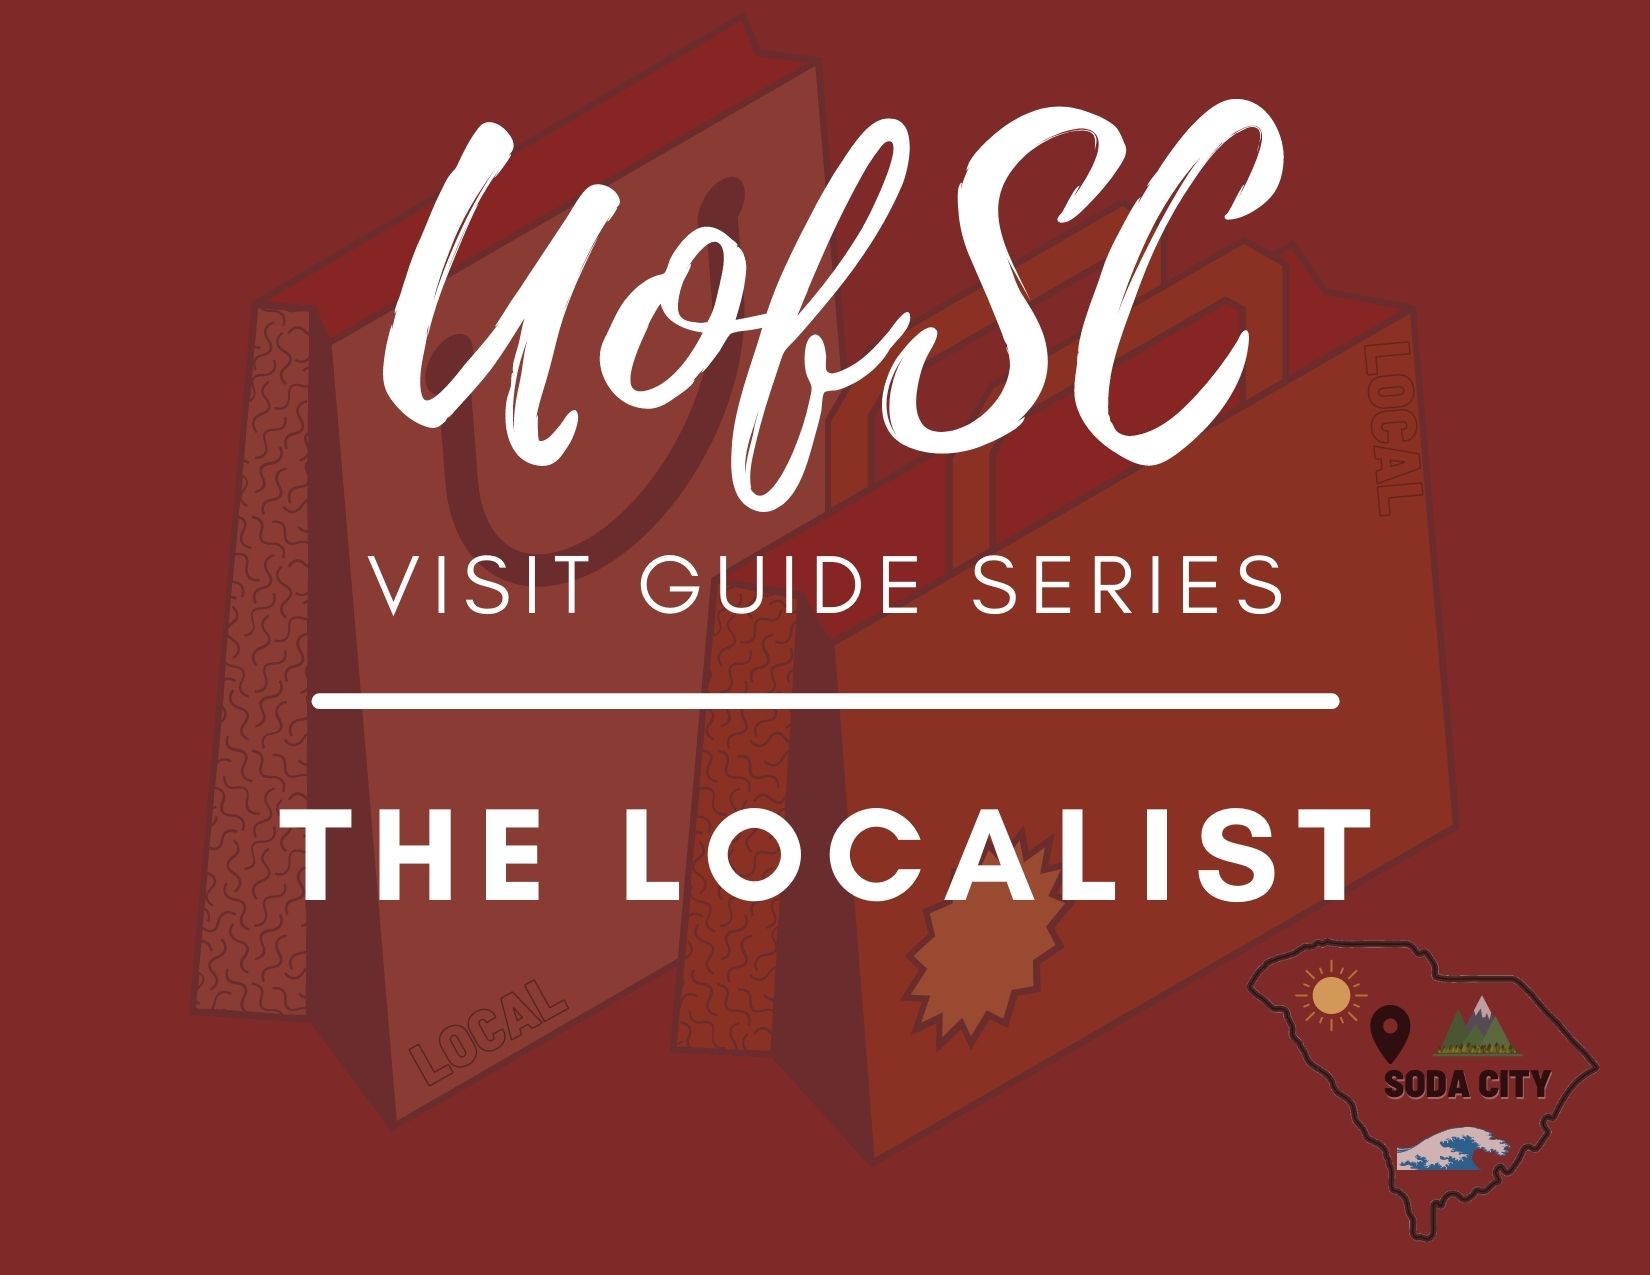 UofSC Visit Guide Series The Localist